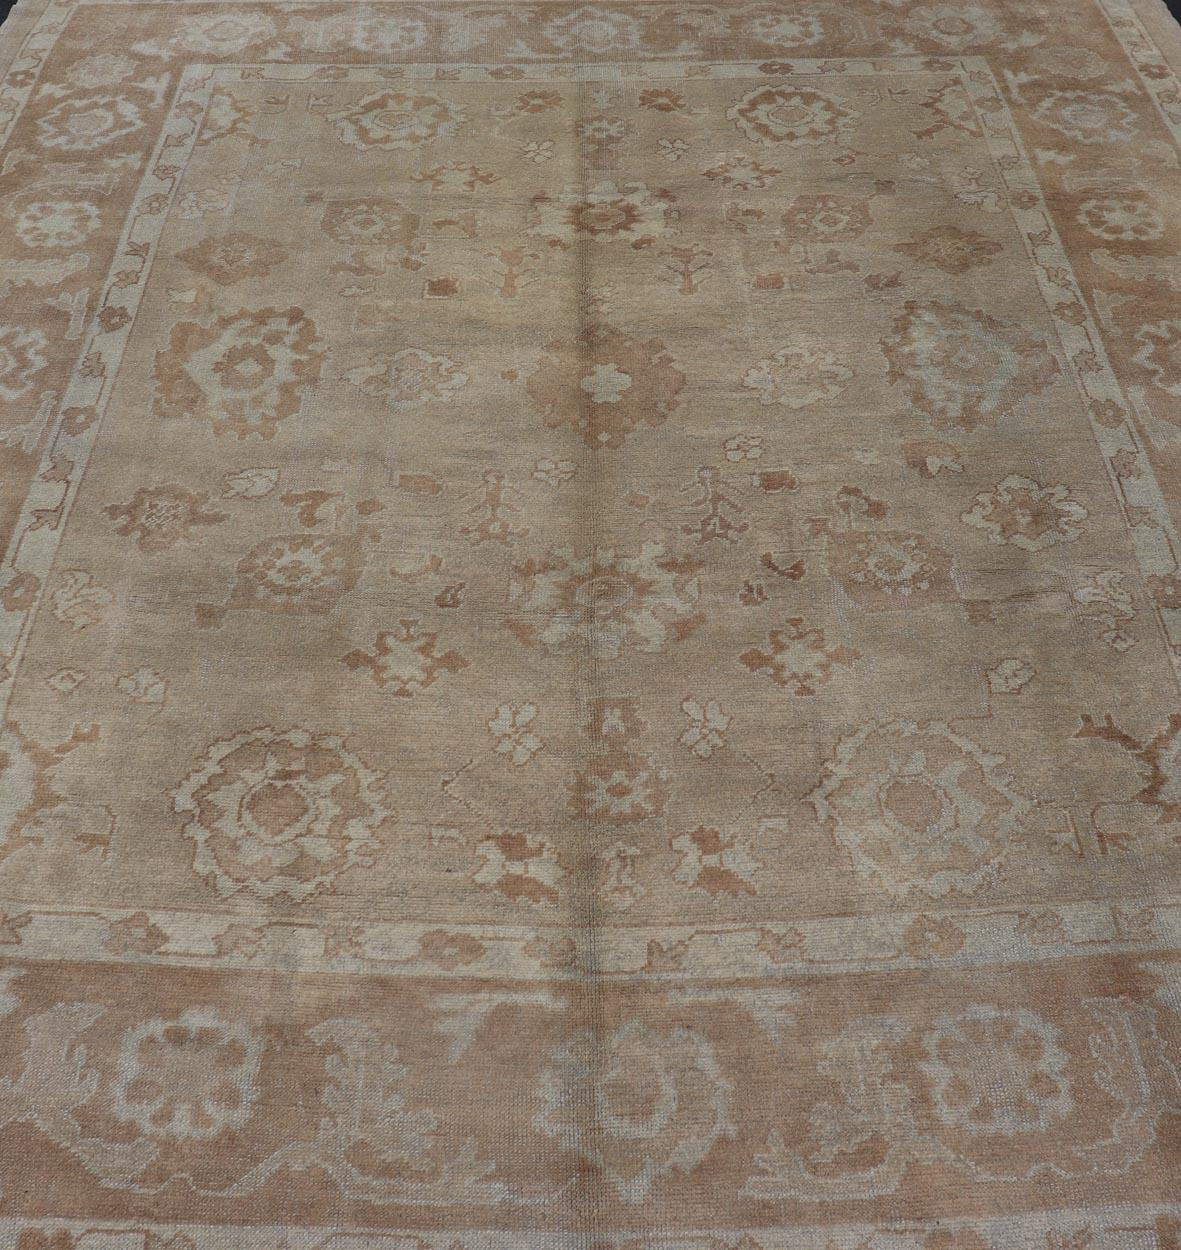 Neutral Colors Vintage Angora Oushak Turkish Rug in Light Brown and Cream 3